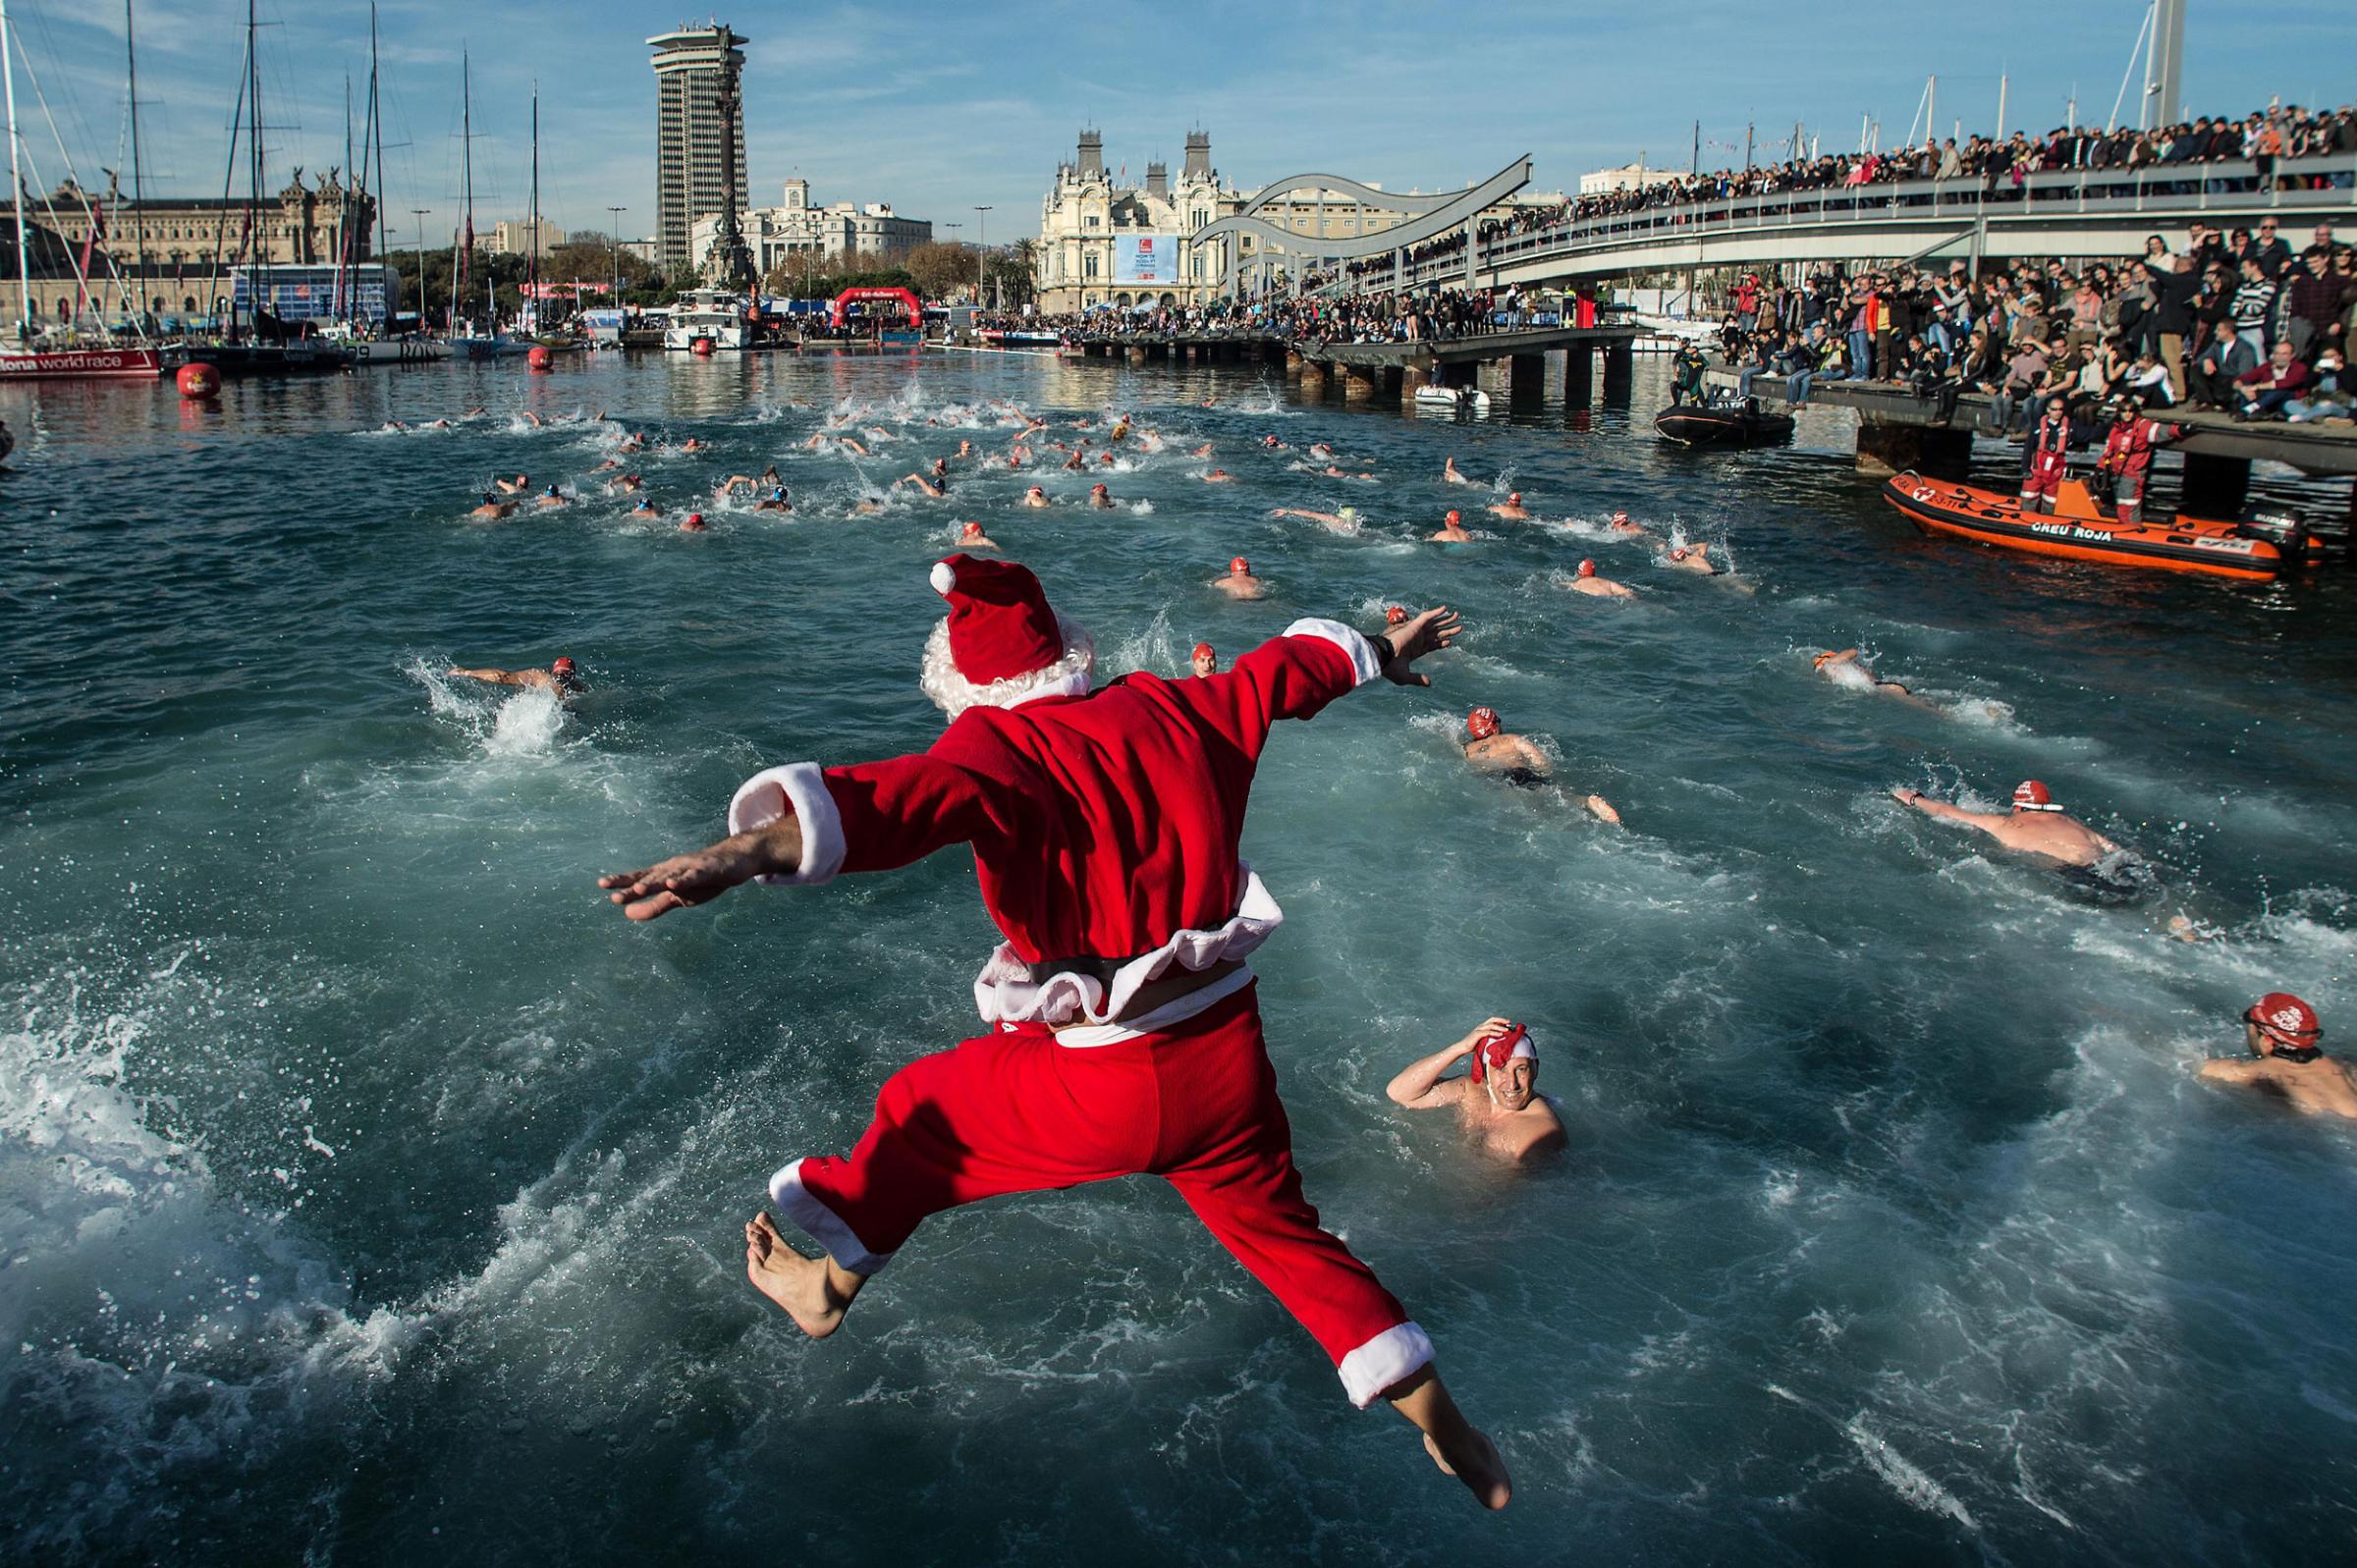 A competitor in Christmas fancy dress jumps into the sea during the 105th Barcelona Traditional Christmas Swimming Cup at the Old Harbour of Barcelona on Dec. 25, 2014 in Barcelona, Spain. The Copa Nadal is organised by the Barcelona Swimming Club and involves competitors swimming across some 200 metres of water in the harbour.